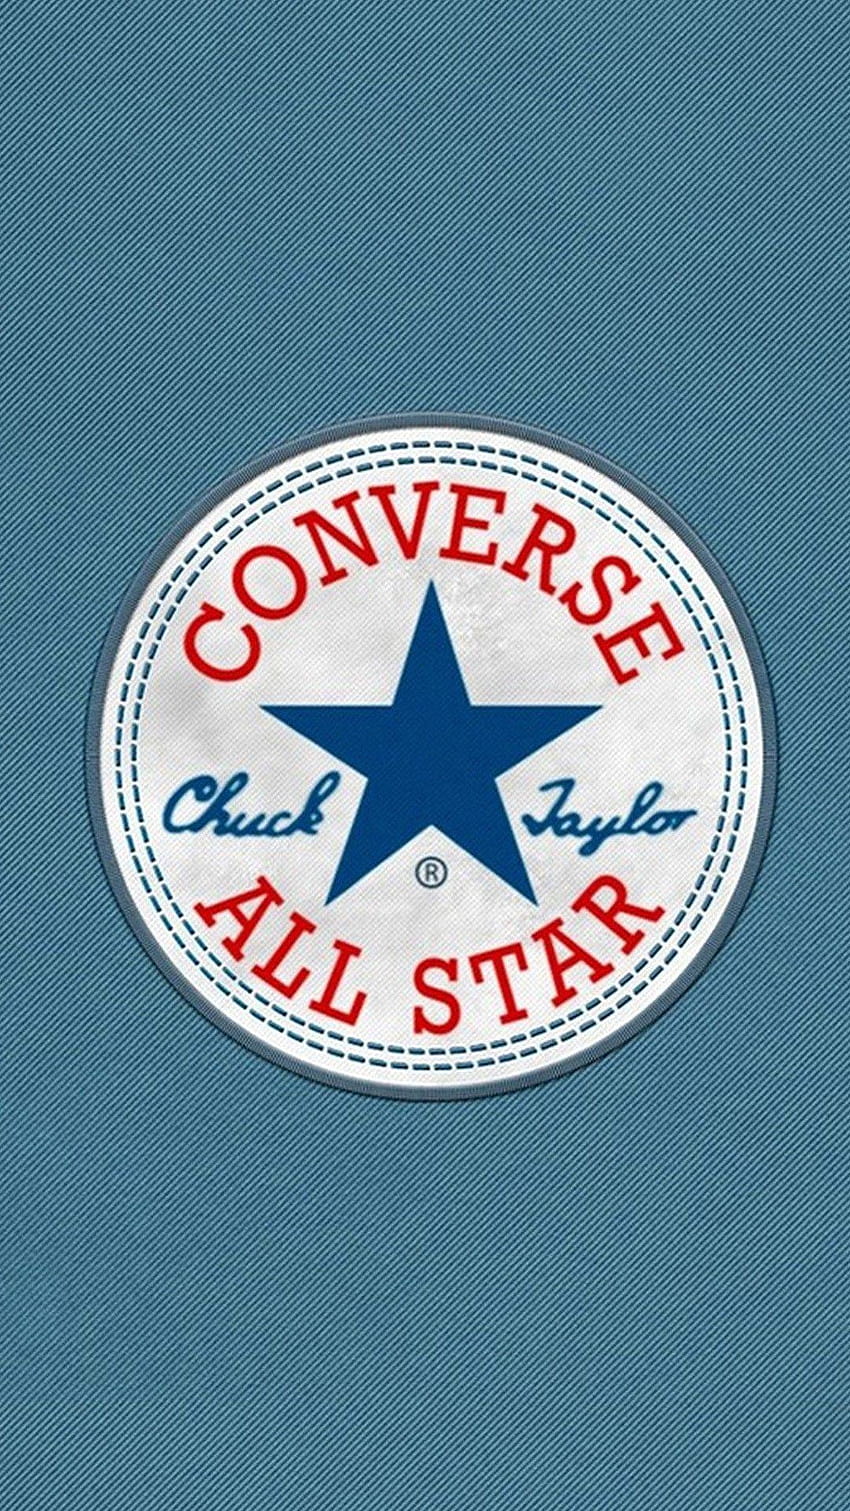 Converse All Star Blue Logo Smartphone and, converse mobile HD phone wallpaper